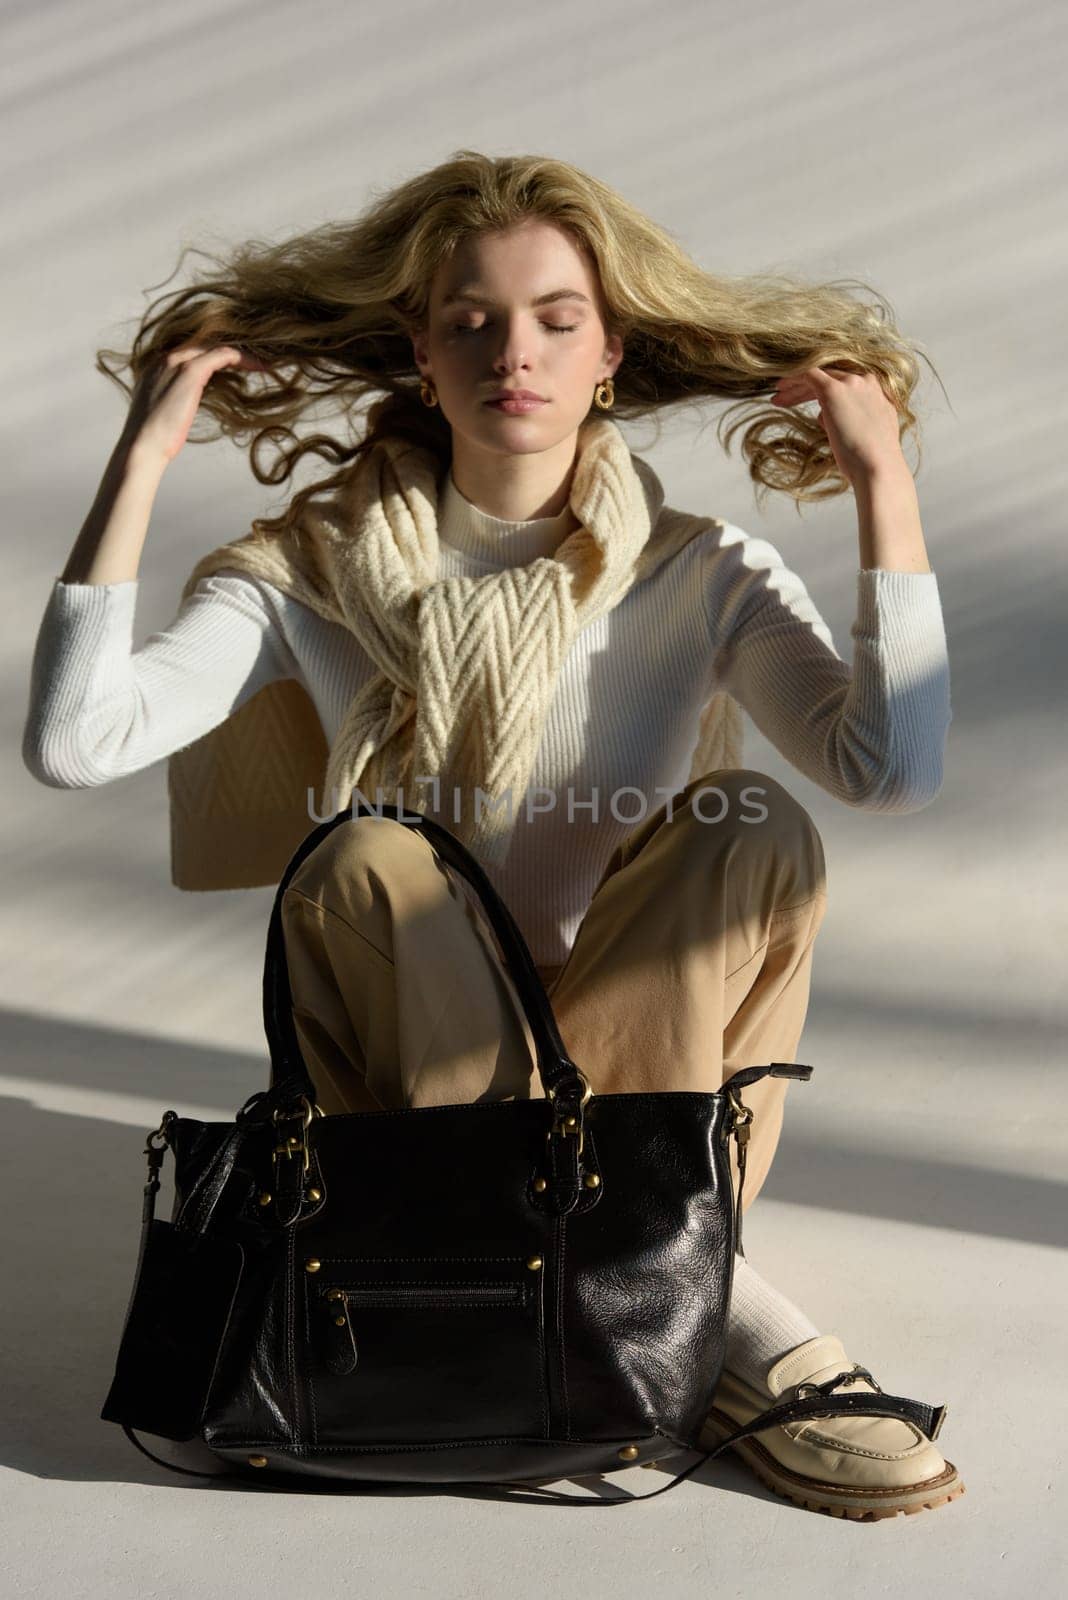 beautiful curly blond hair woman posing with a small shopper bag sitting on the floor. Model wearing stylish white sweater, classic trousers and loafer shoes